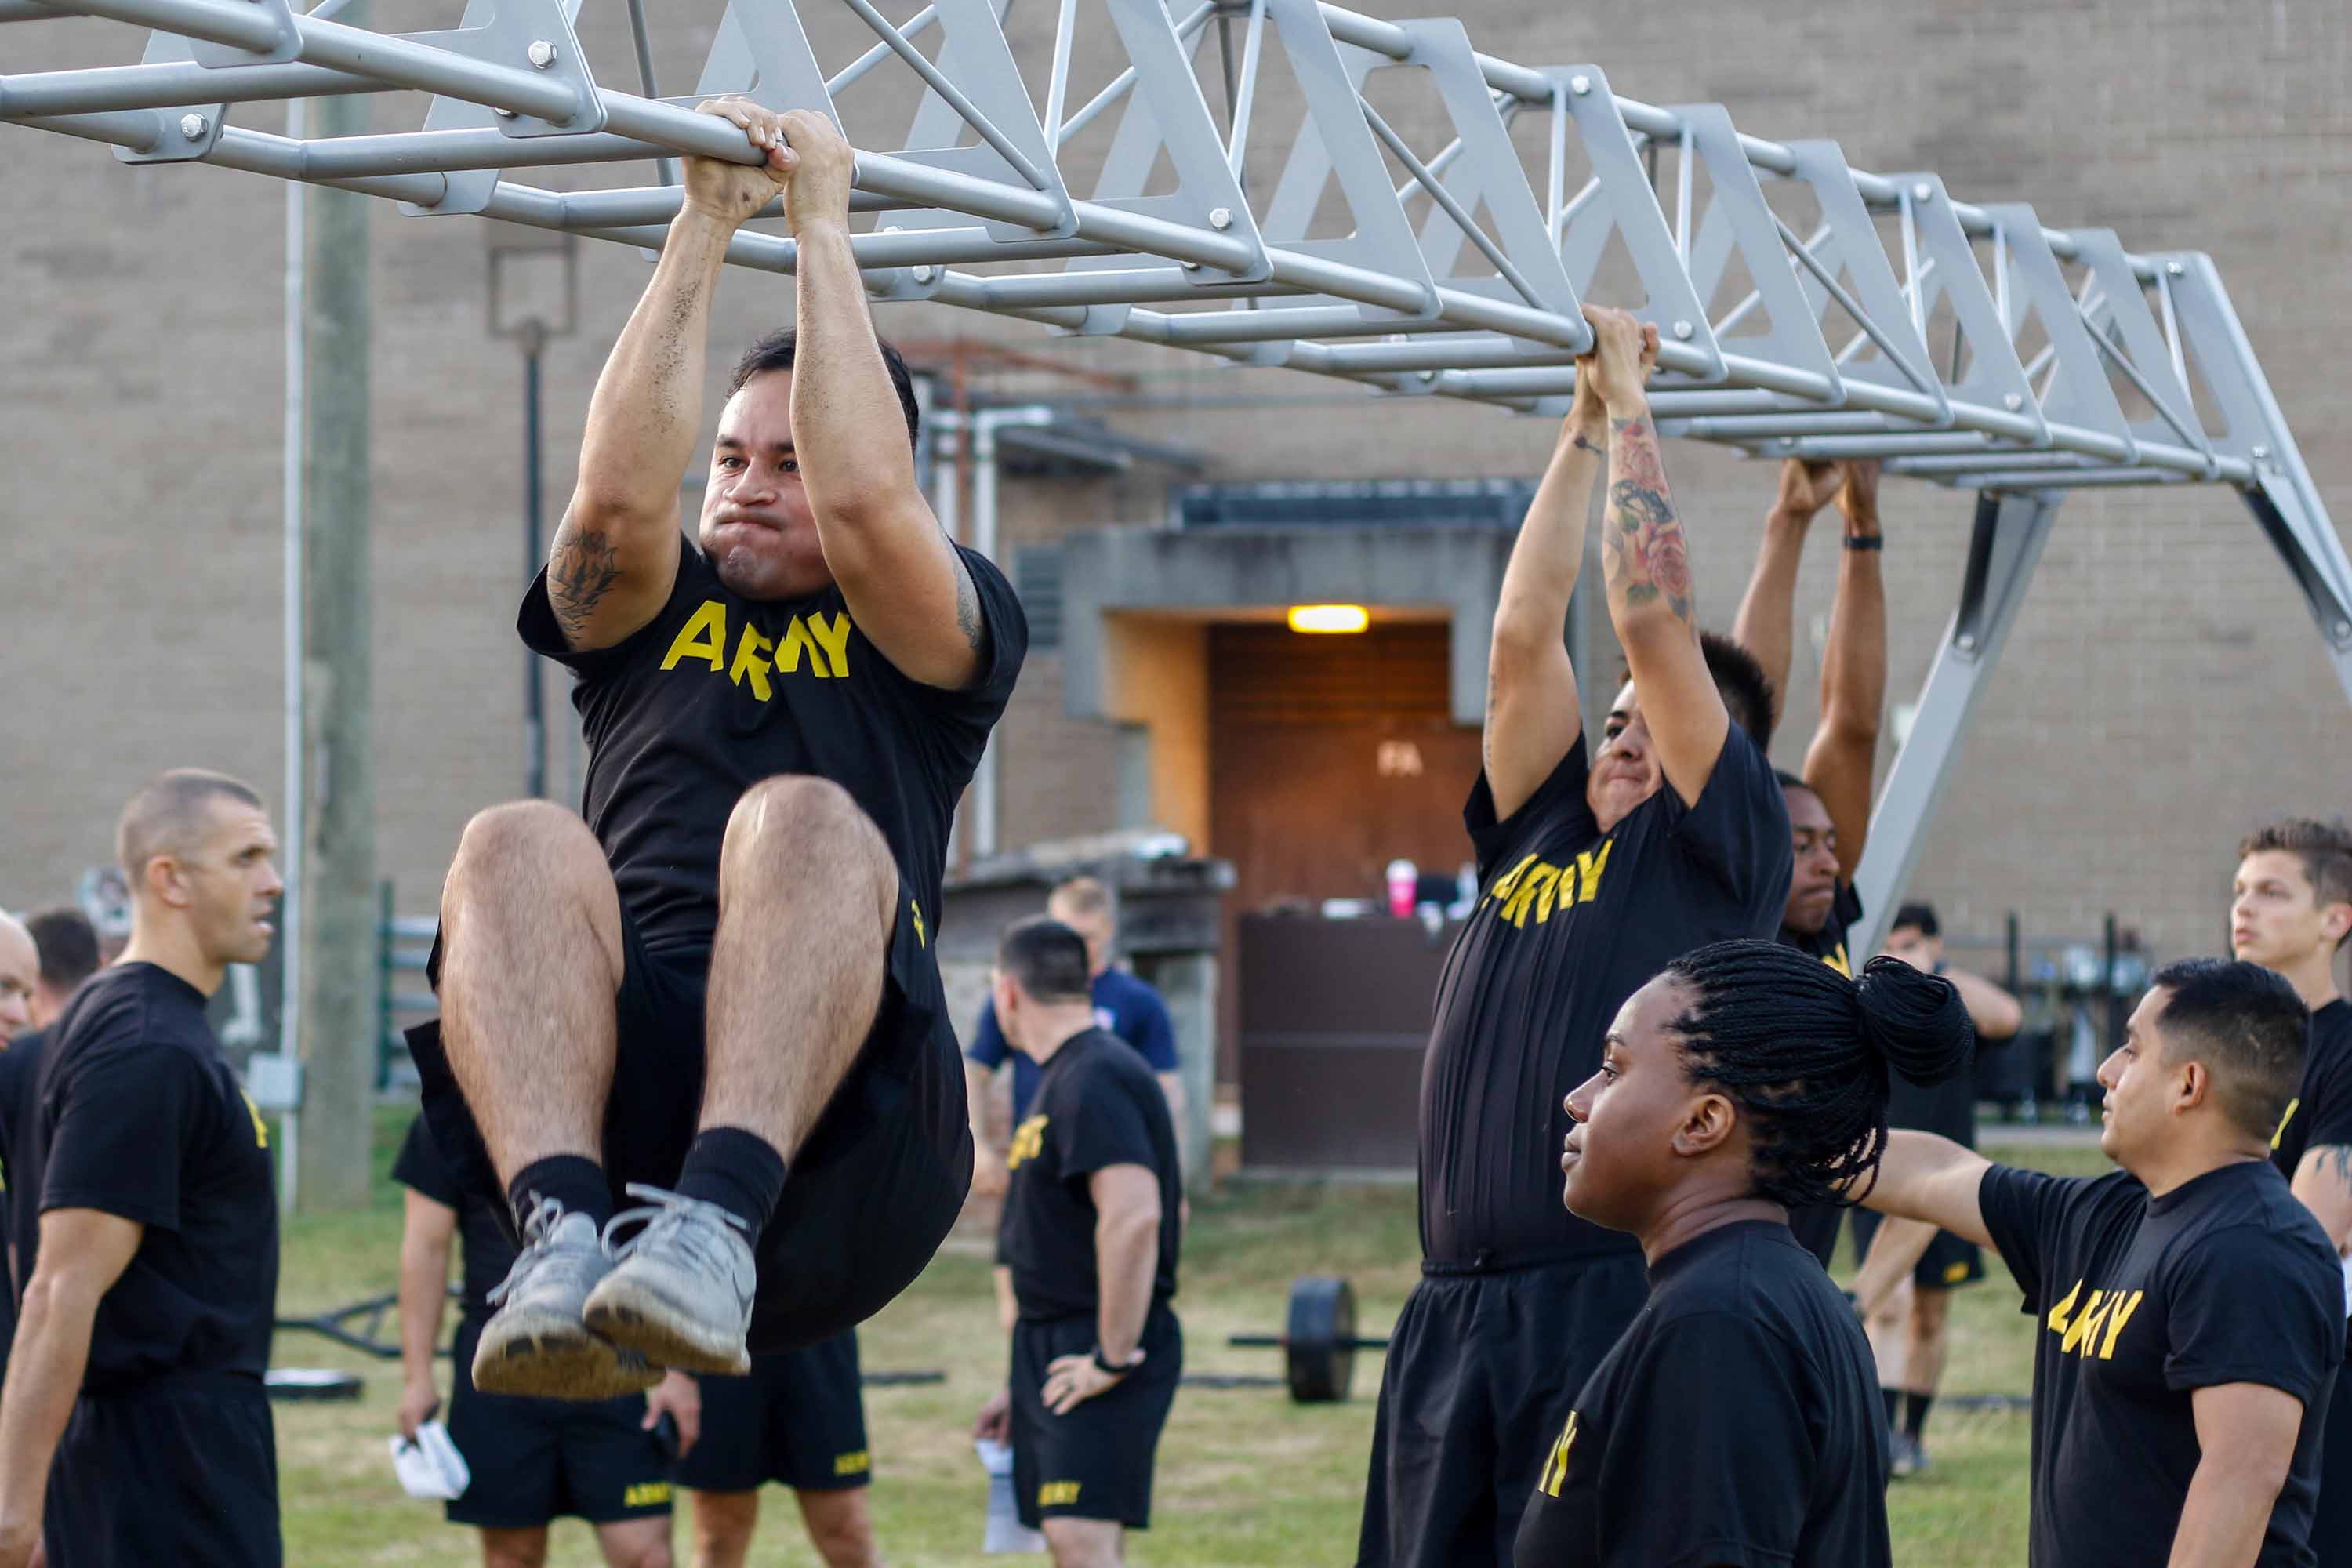 Army Acft News - Army Military